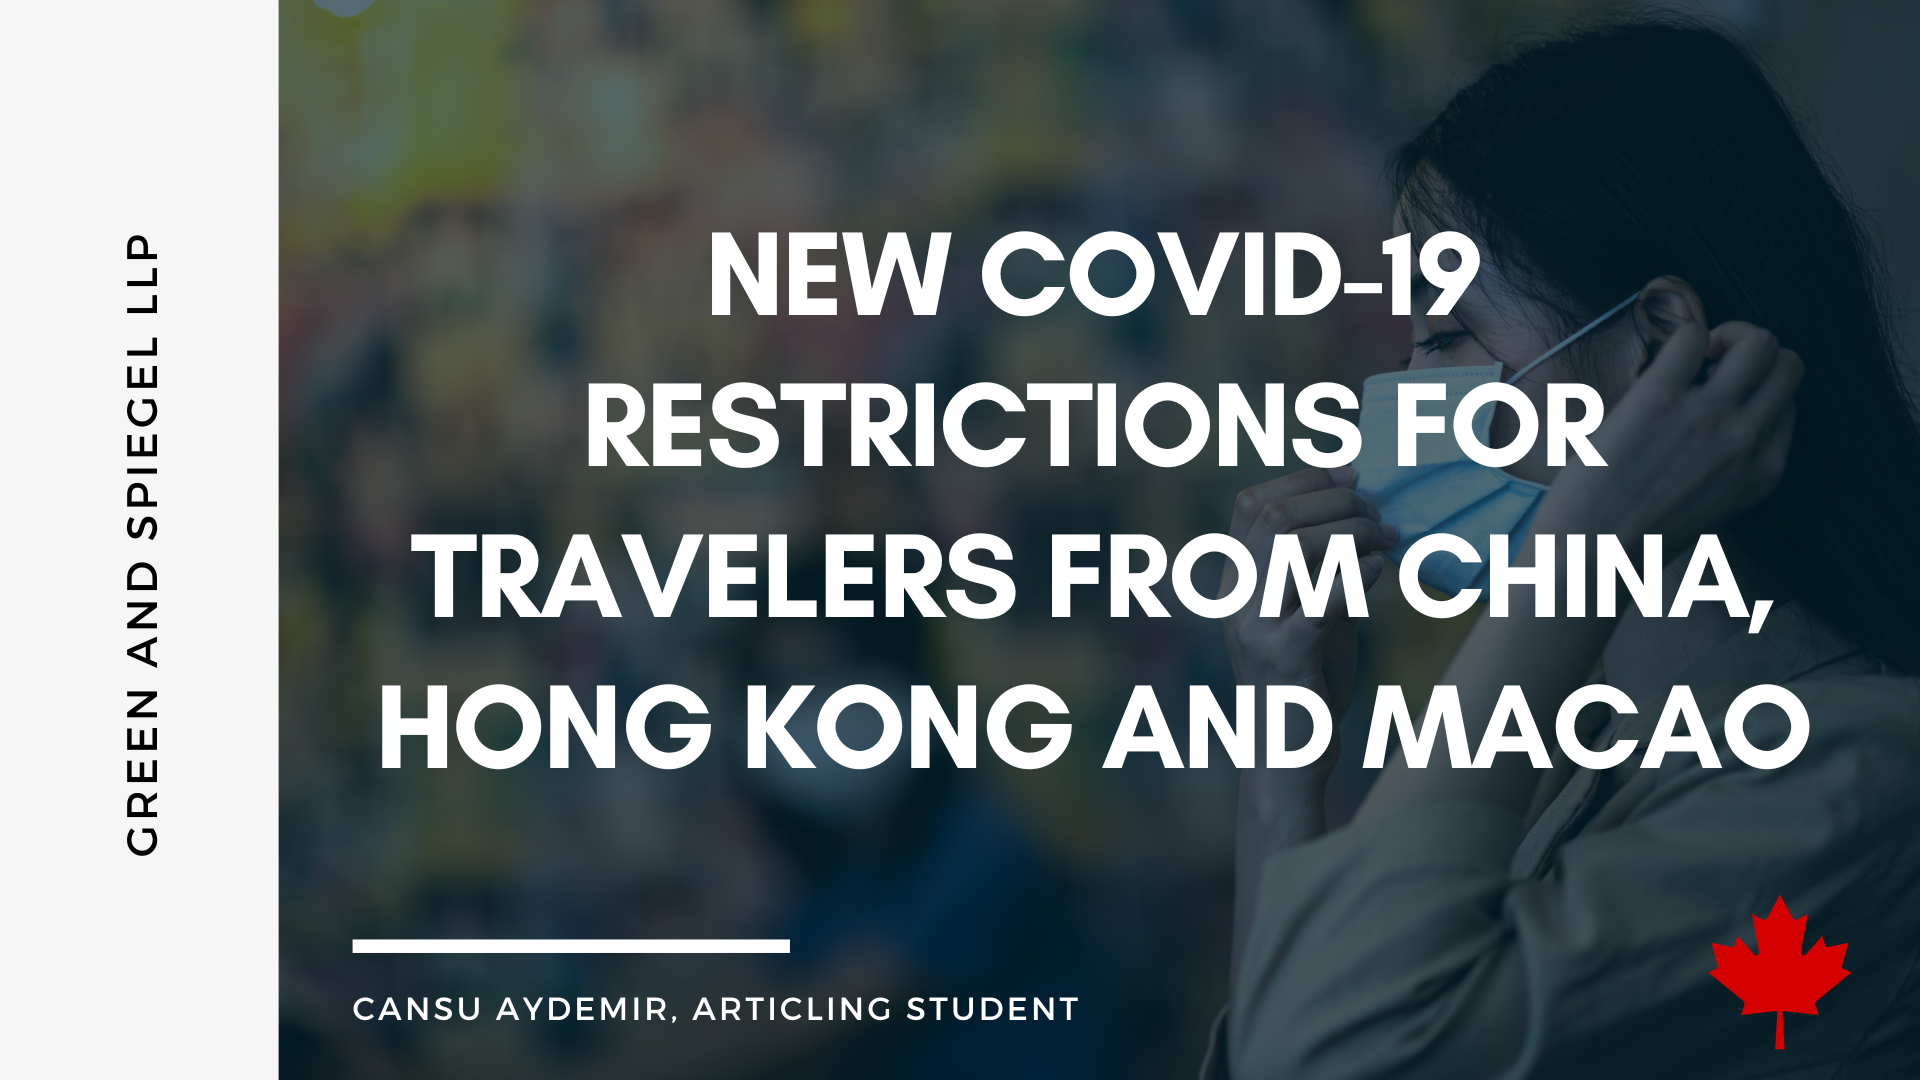 New COVID-19 restrictions for travelers from China, Hong Kong and Macao 